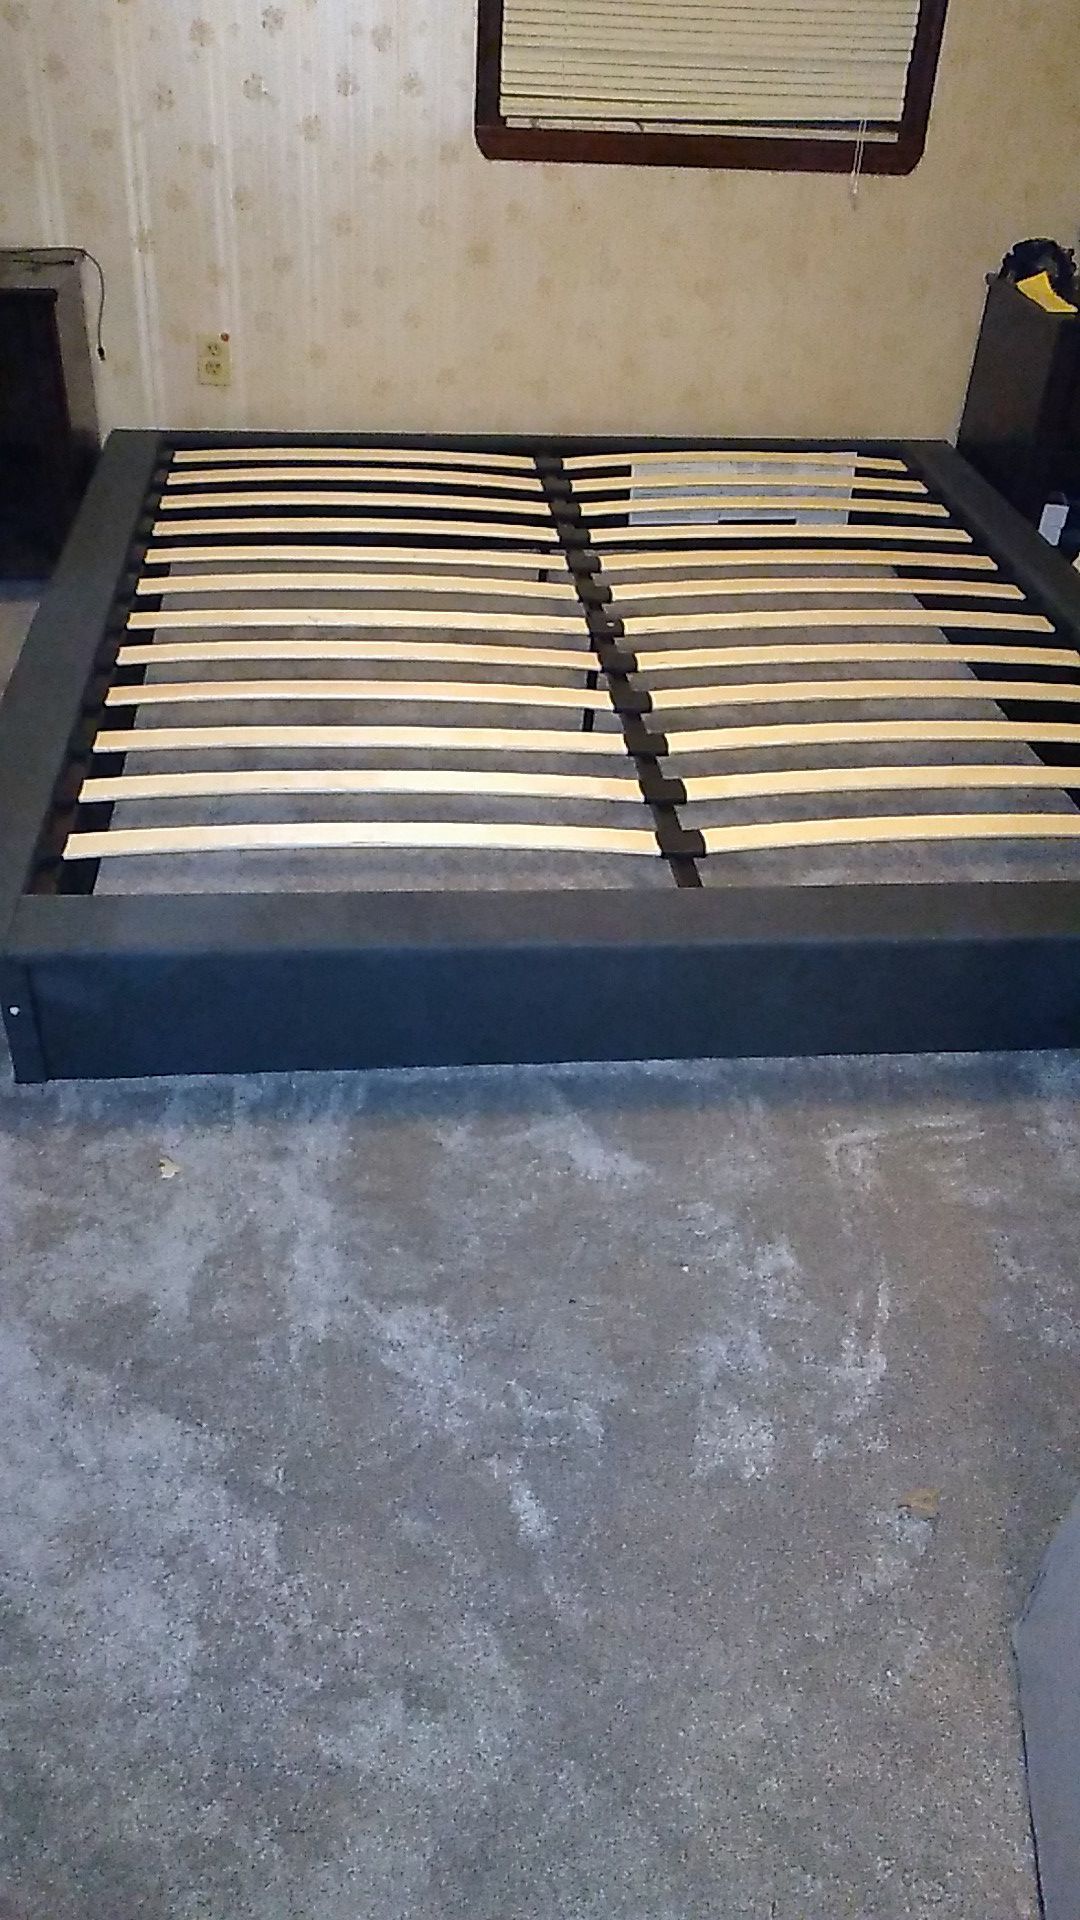 King size bed frame and two box springs